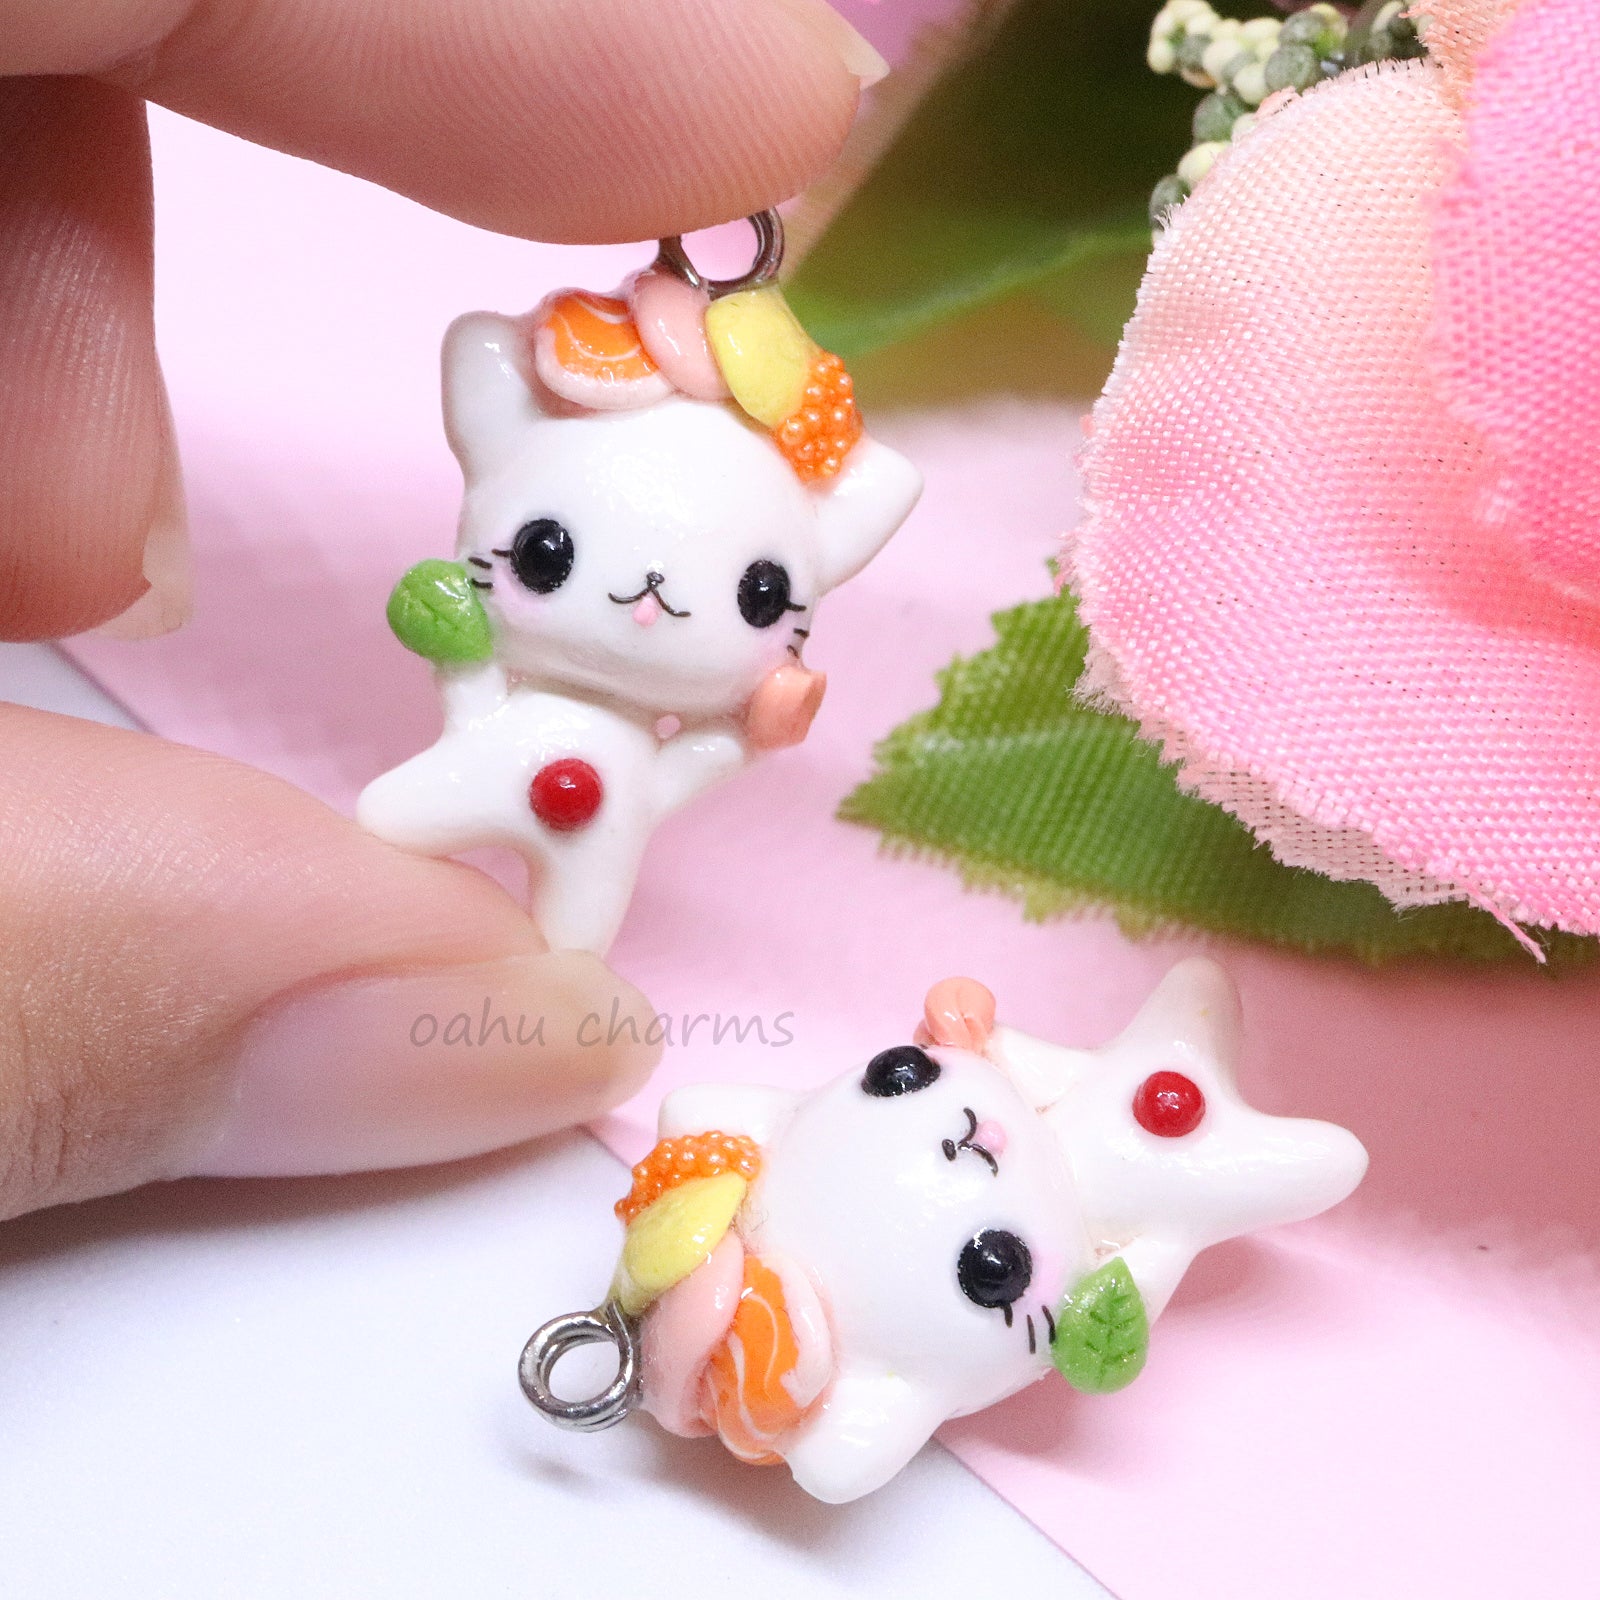 Customized Pet Cat Full Body Polymer Clay Charm – Oahu Charms